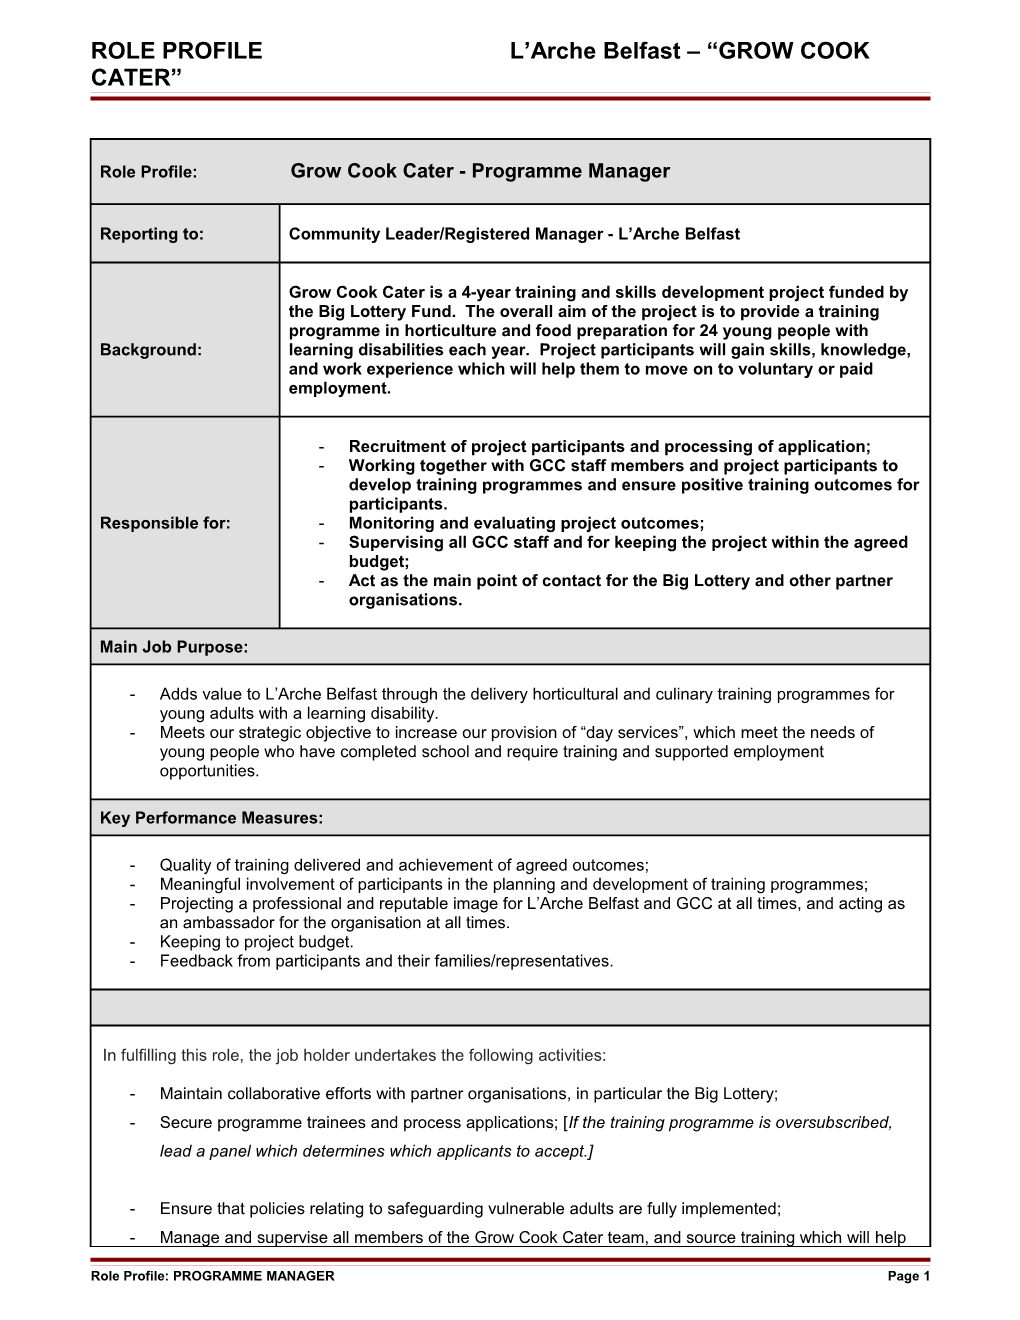 Role Profile: Grow Cook Cater - Programme Manager